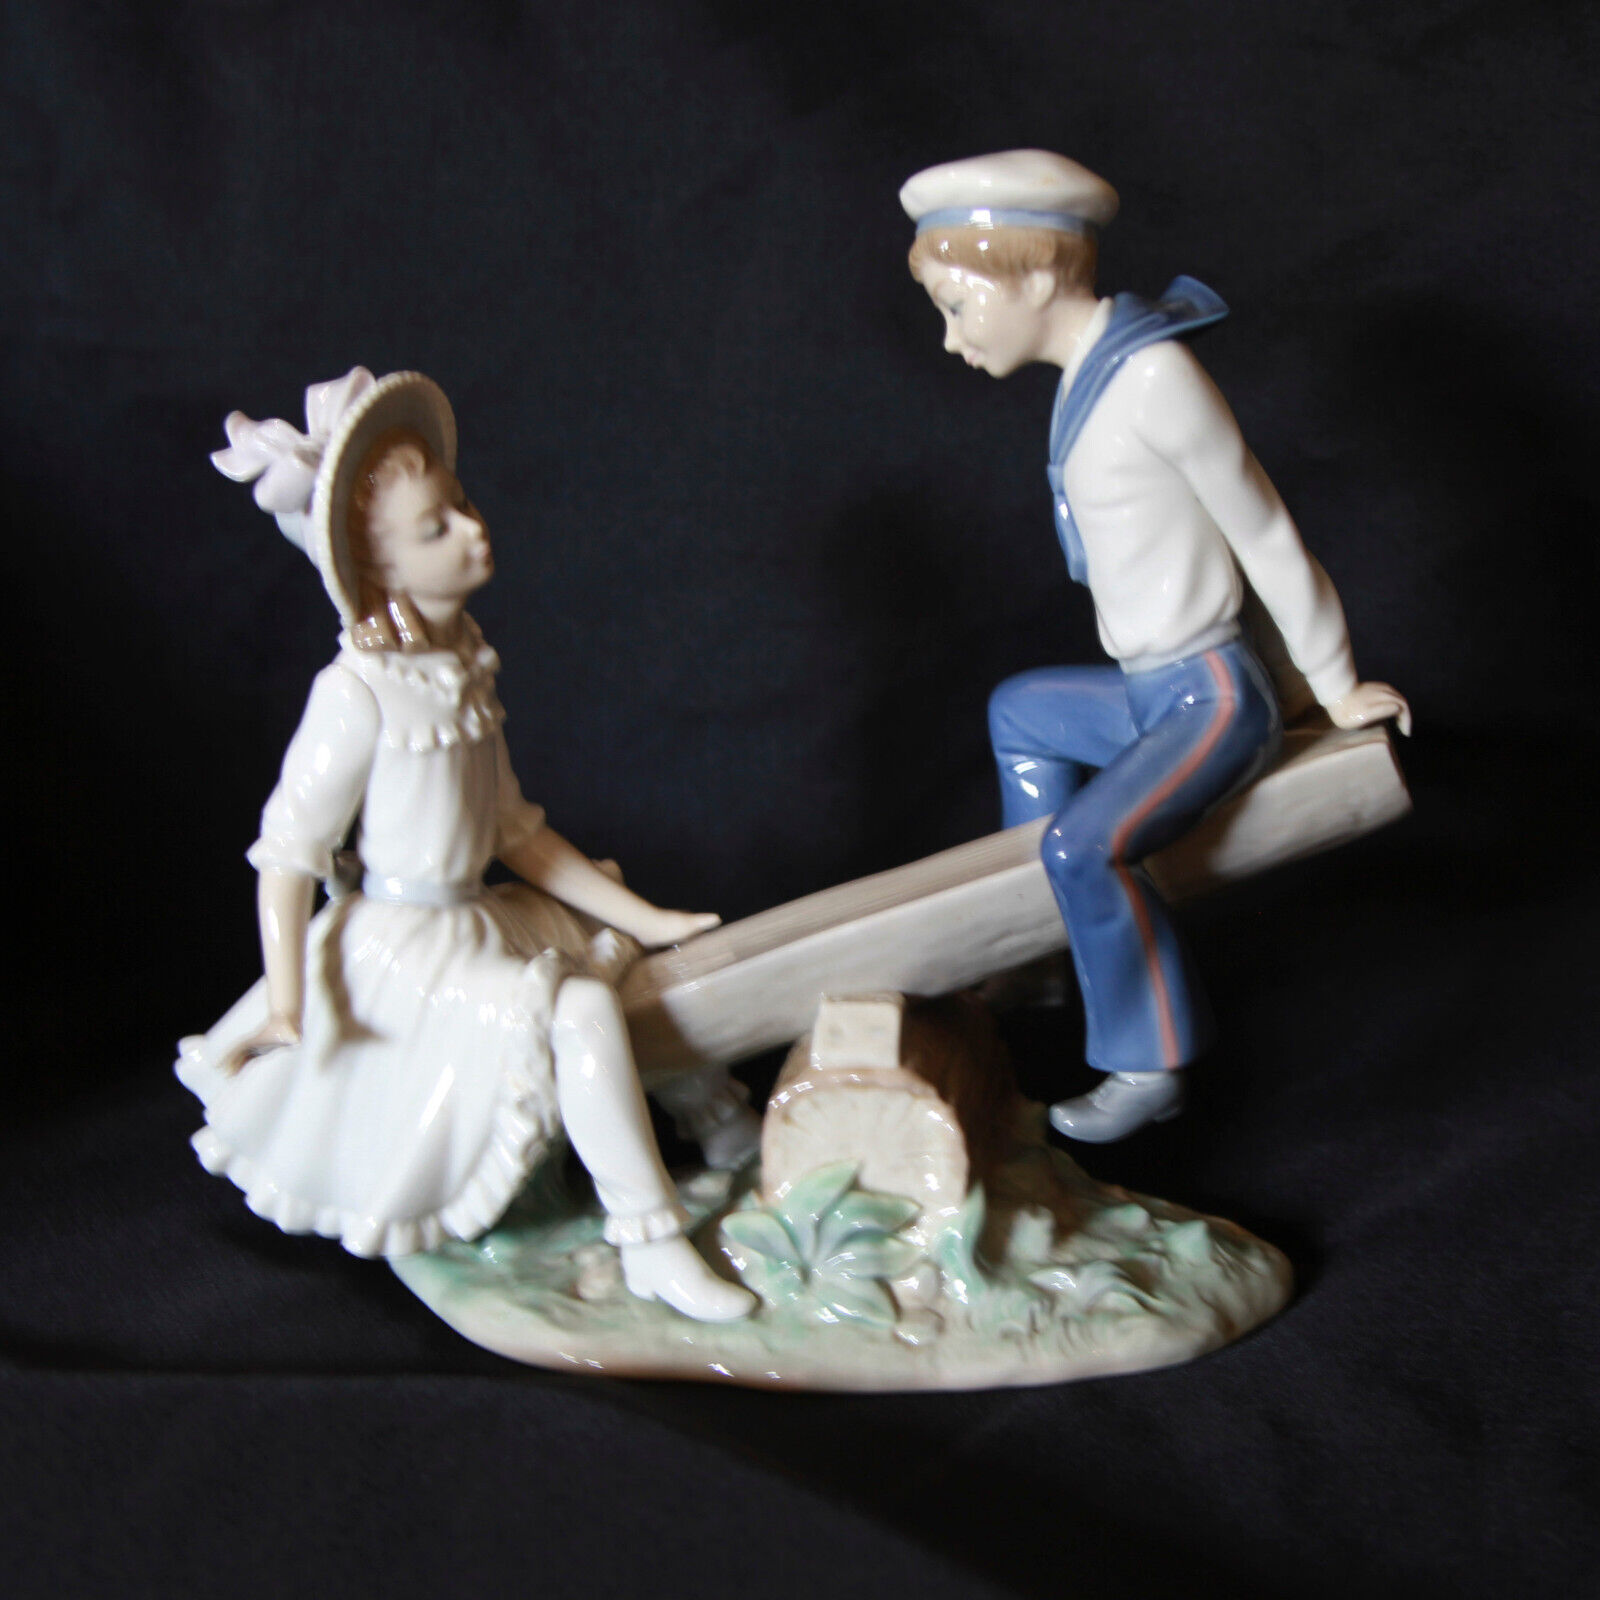 LLADRO Boy and Girl on a Seesaw  #1255  Excellent Condition